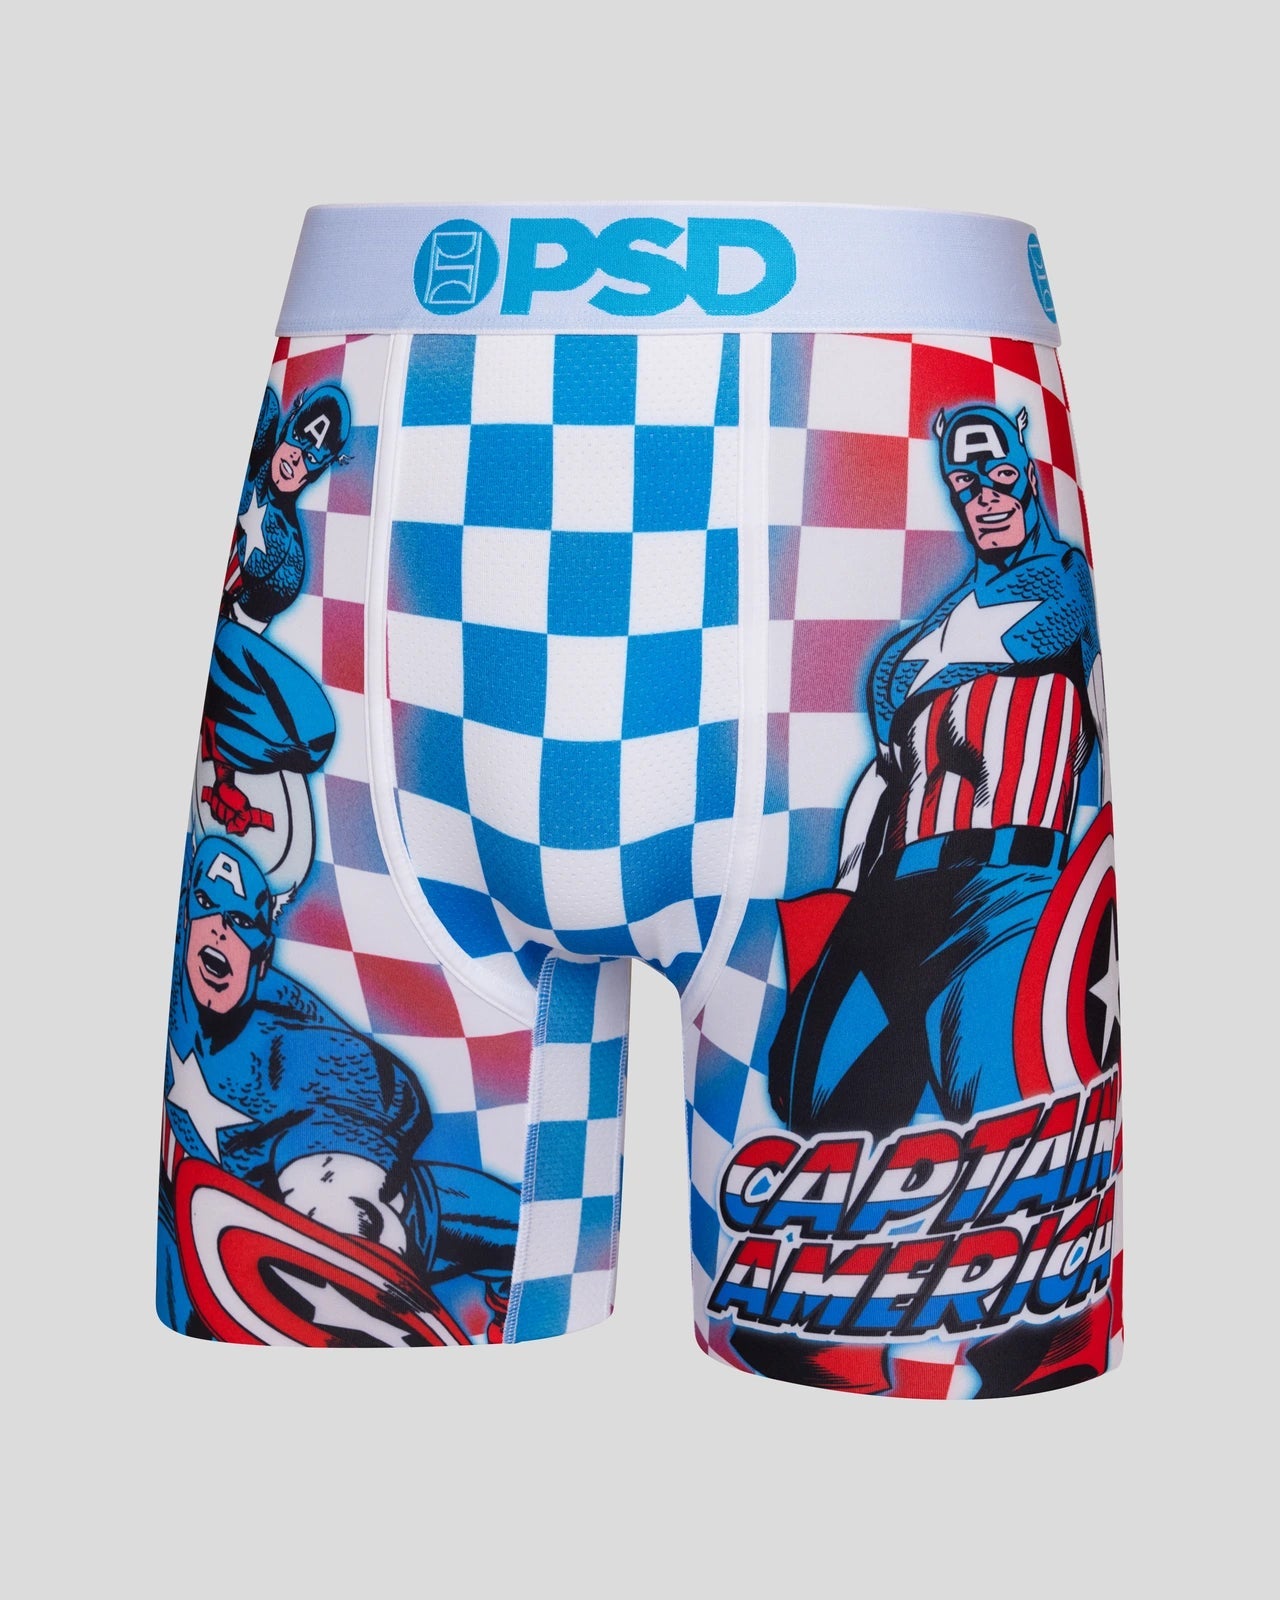 PSD Men's DC Comics Boxer Briefs - Breathable and Supportive Men's